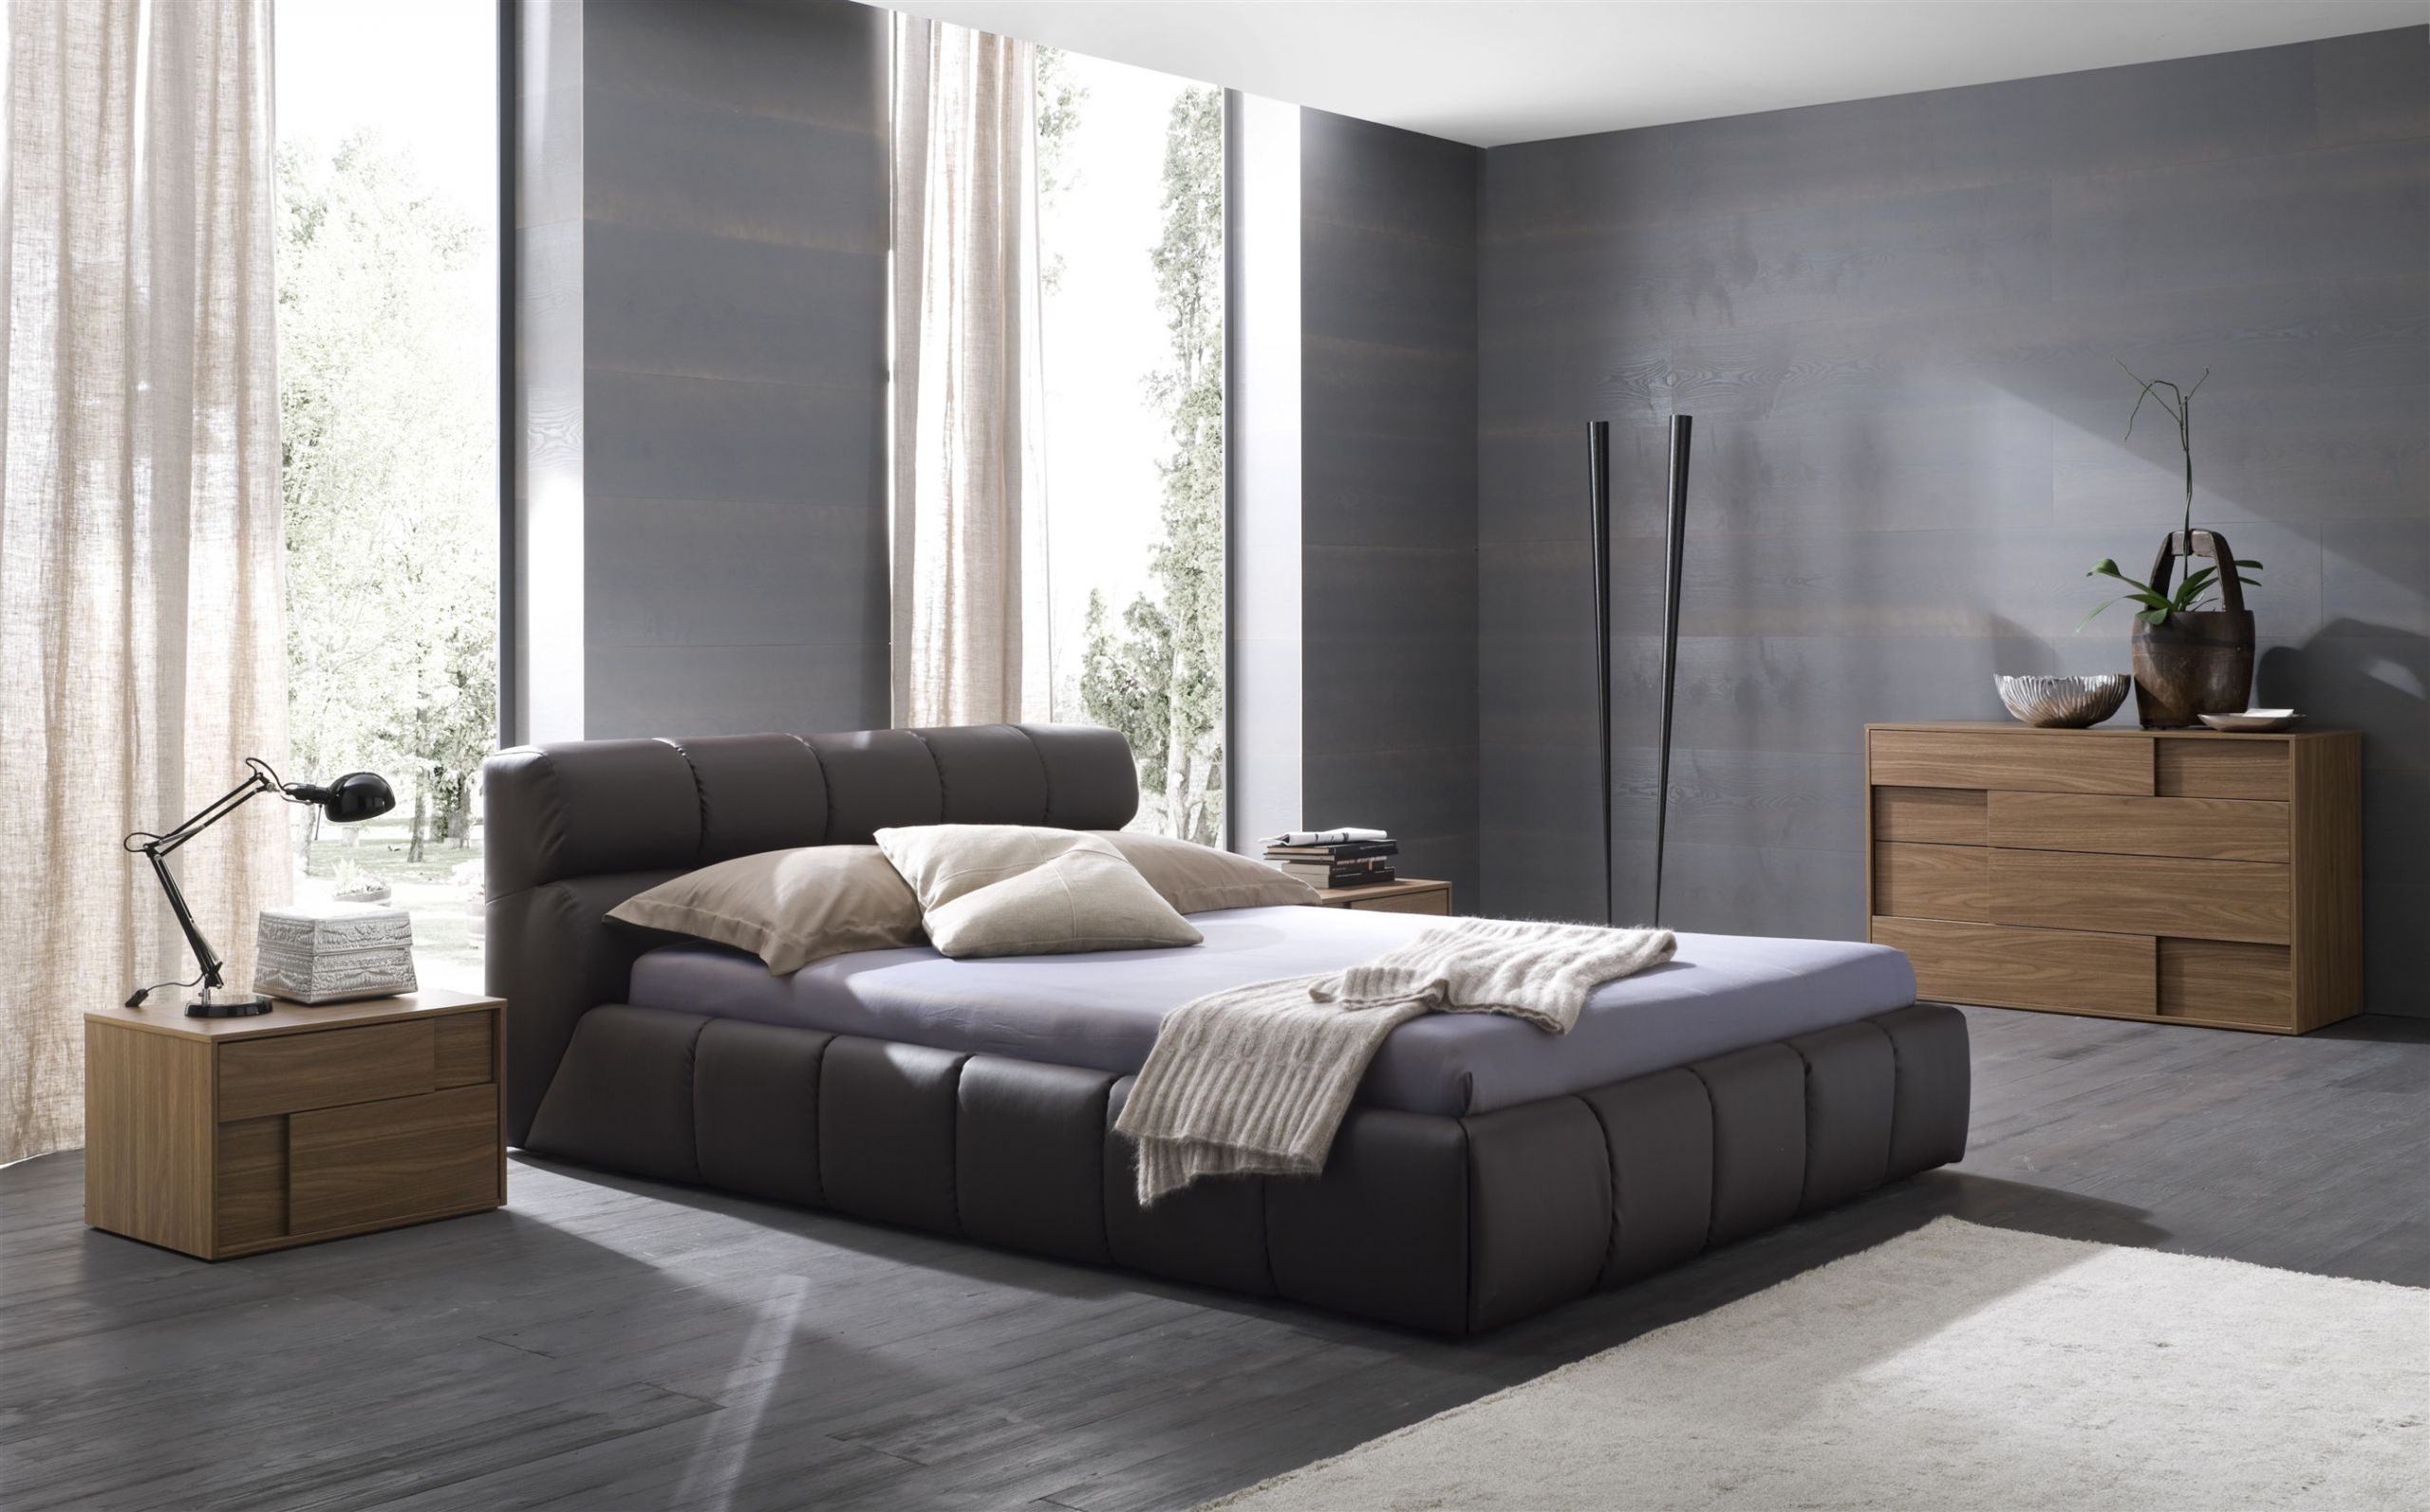 Modern Bedroom Furniture
 40 Modern Bedroom For Your Home – The WoW Style